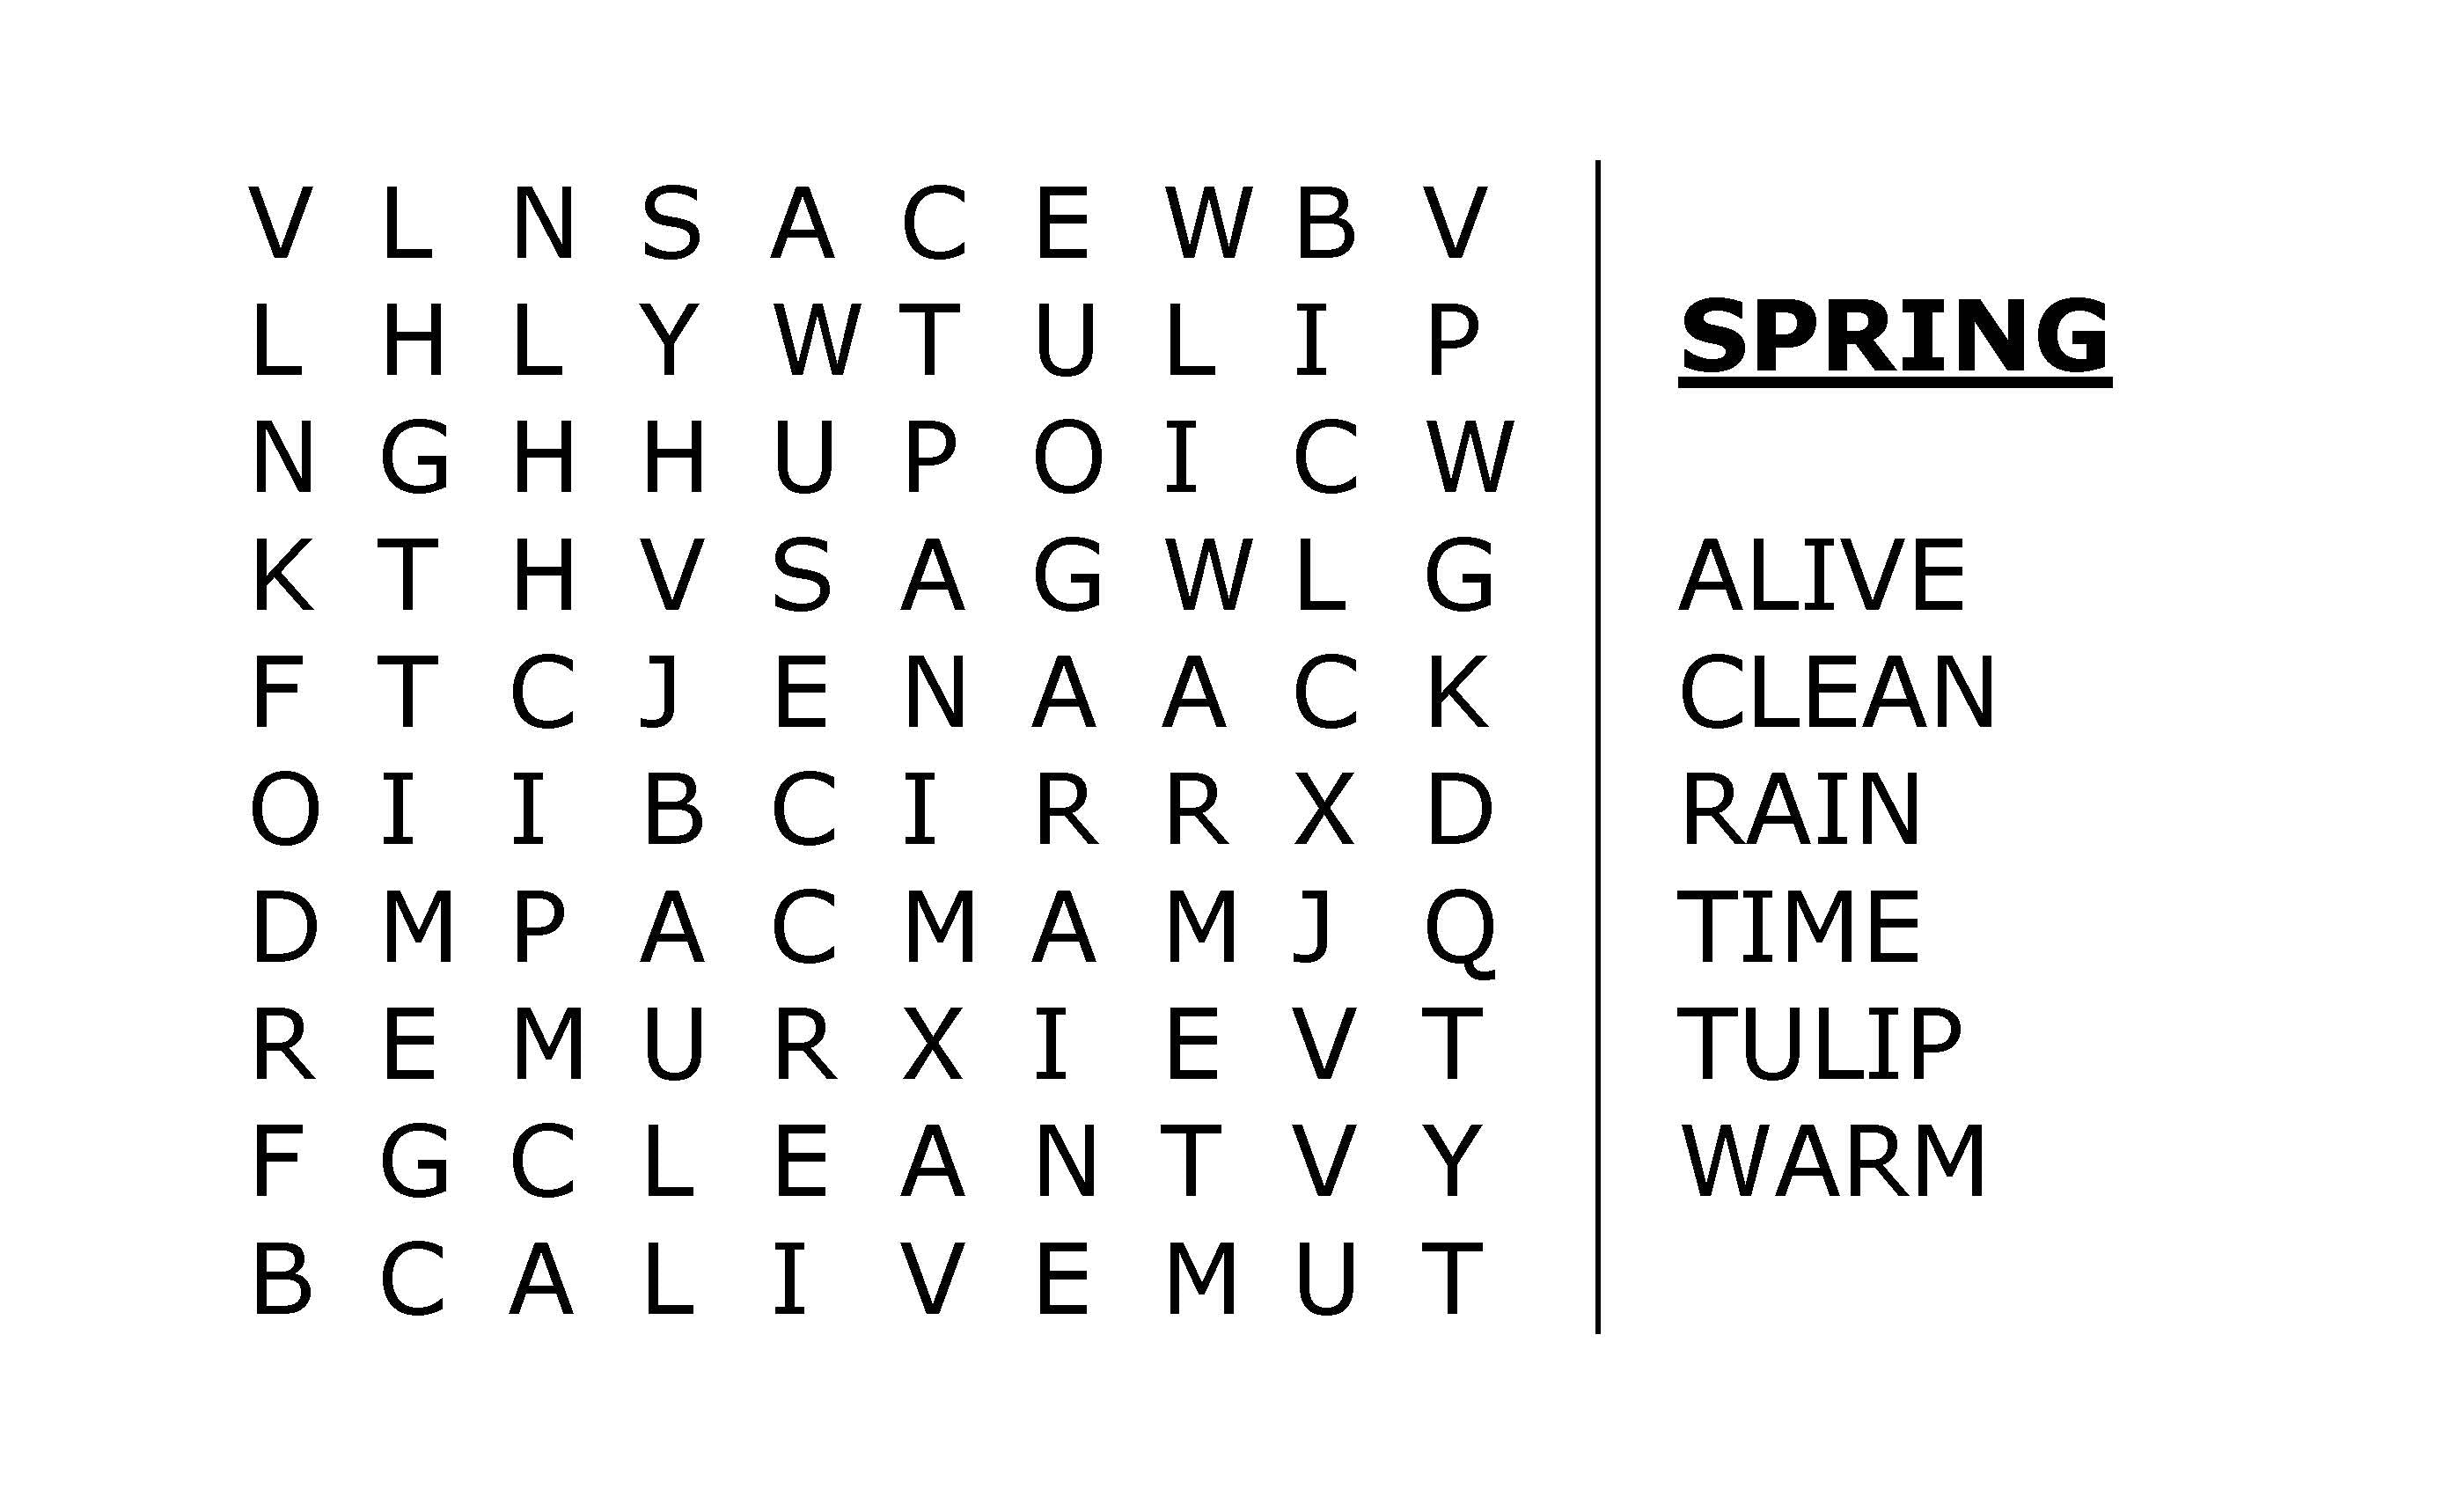 Low Vision Spring Word Search Activity for Dementia and Alzheimers Patients